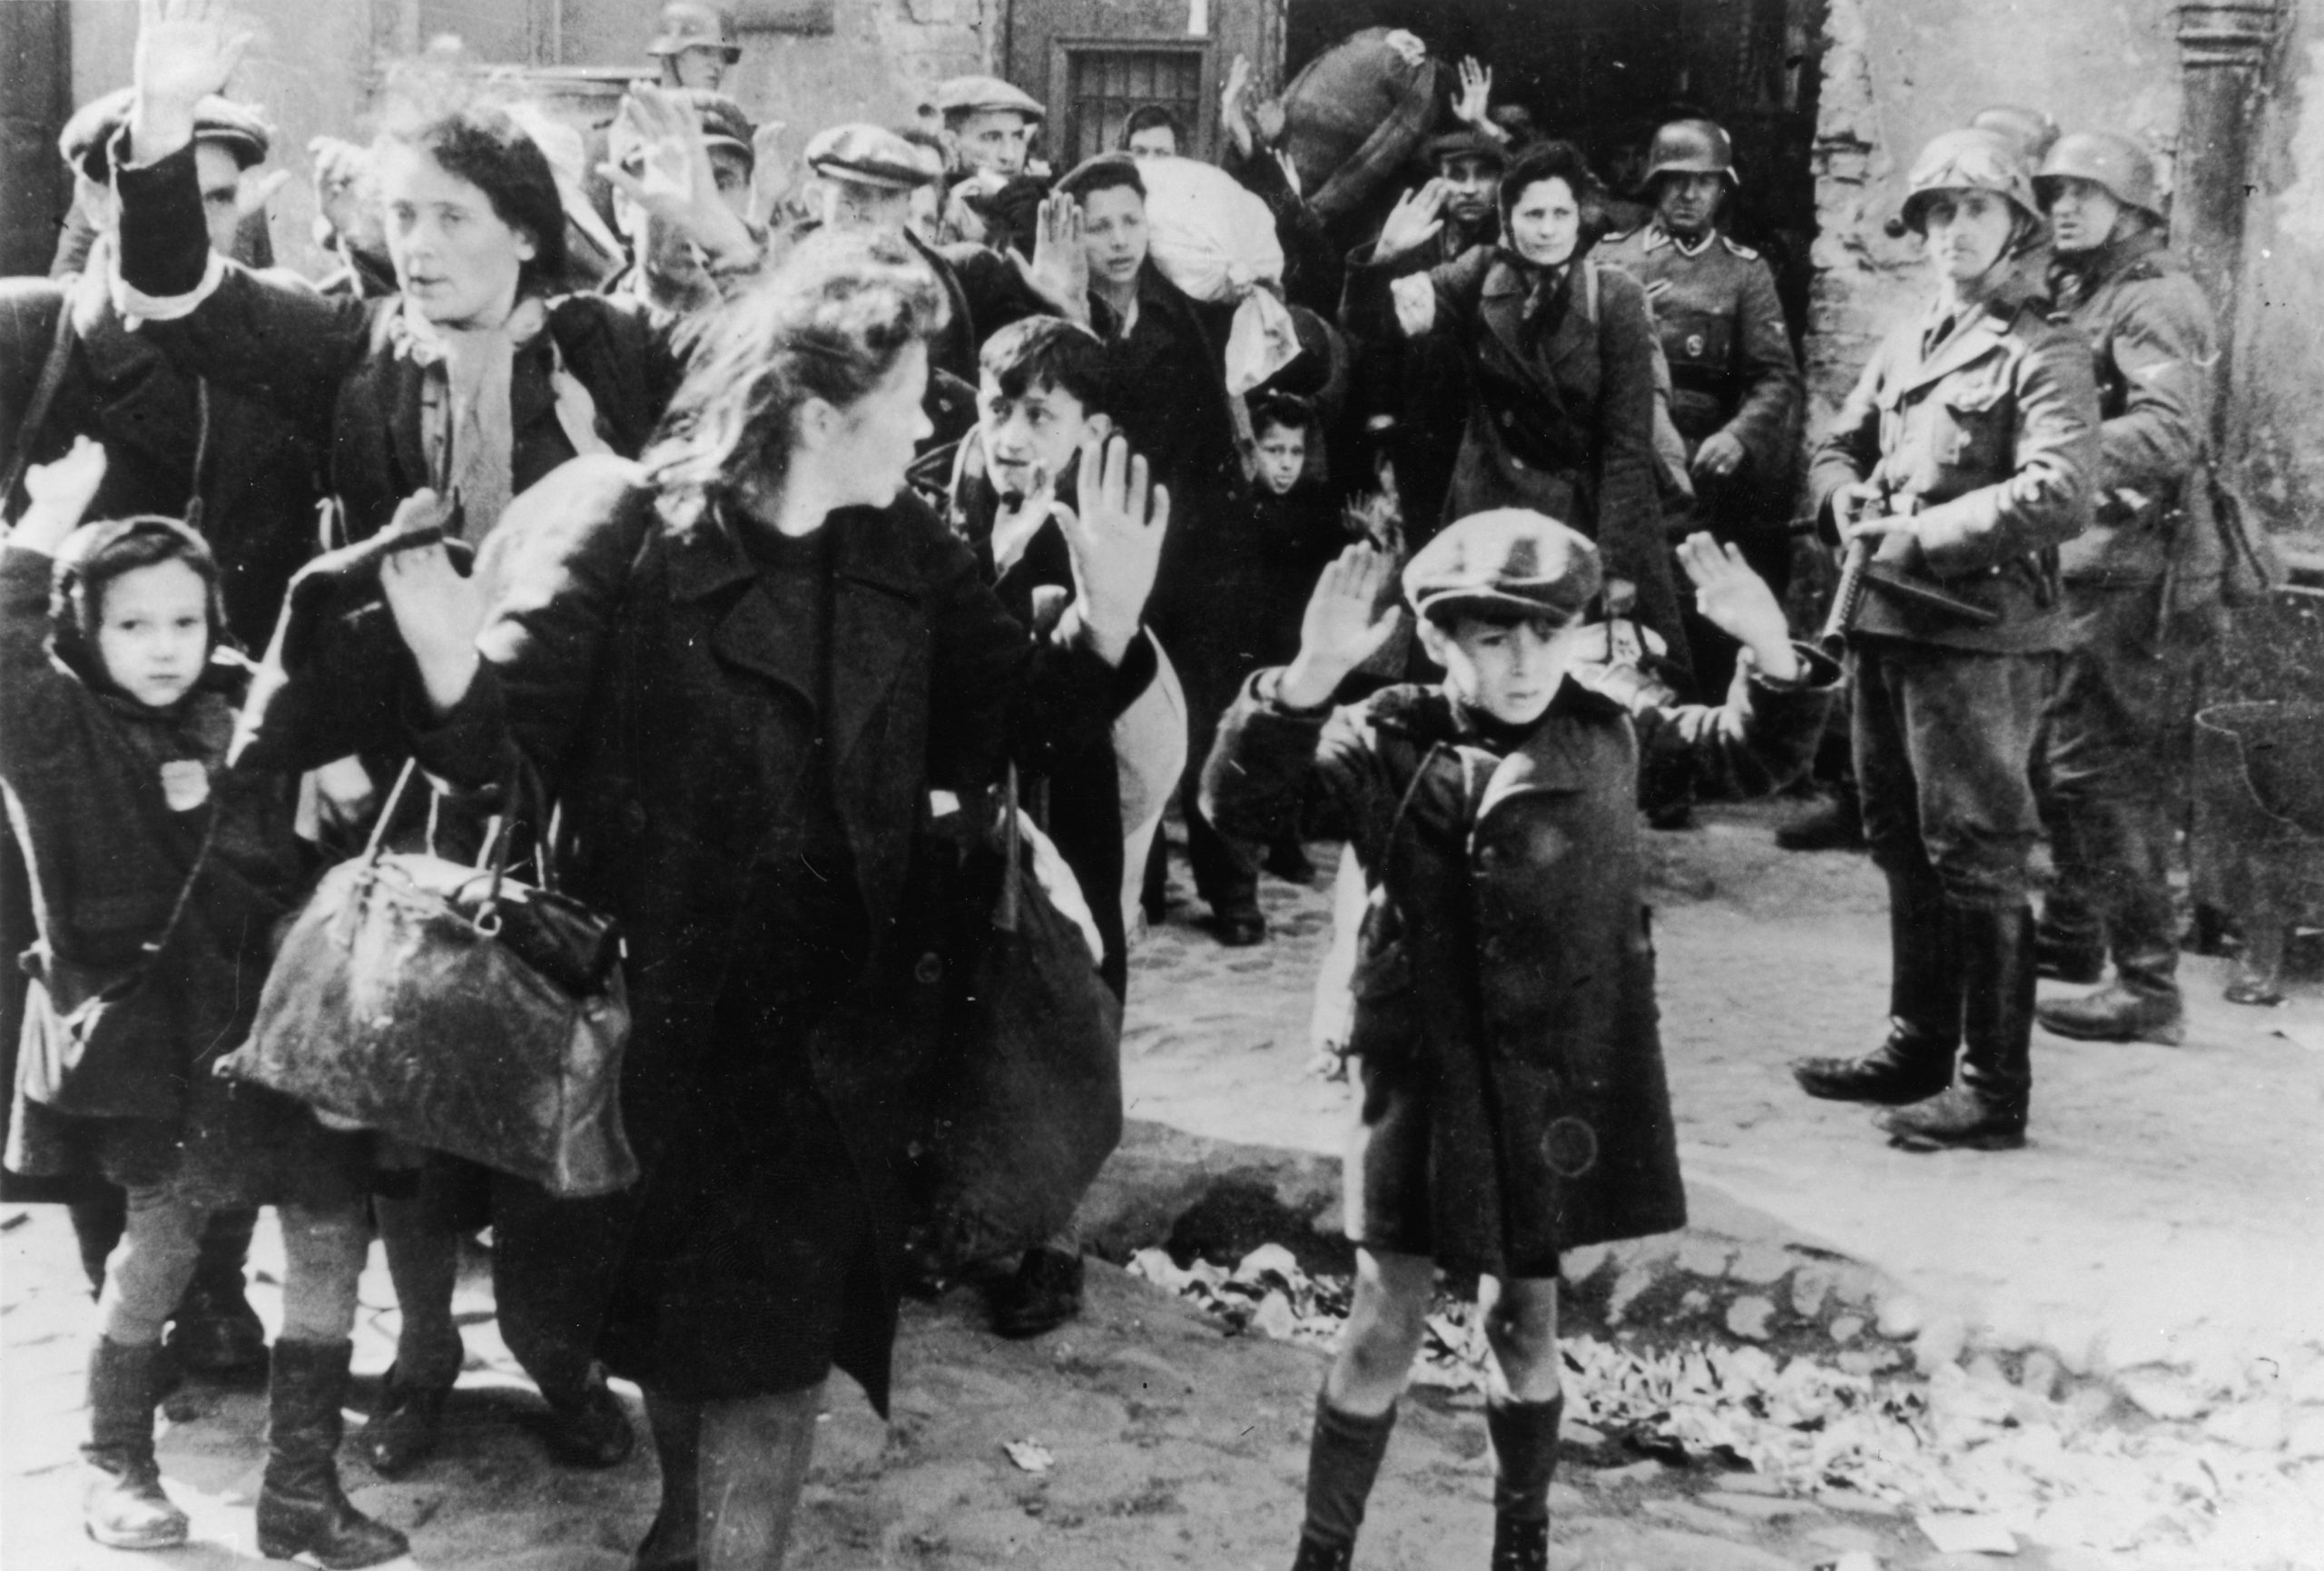 A group of Jewish civilians being held at gunpoint by German SS troops after being forced out of a ...